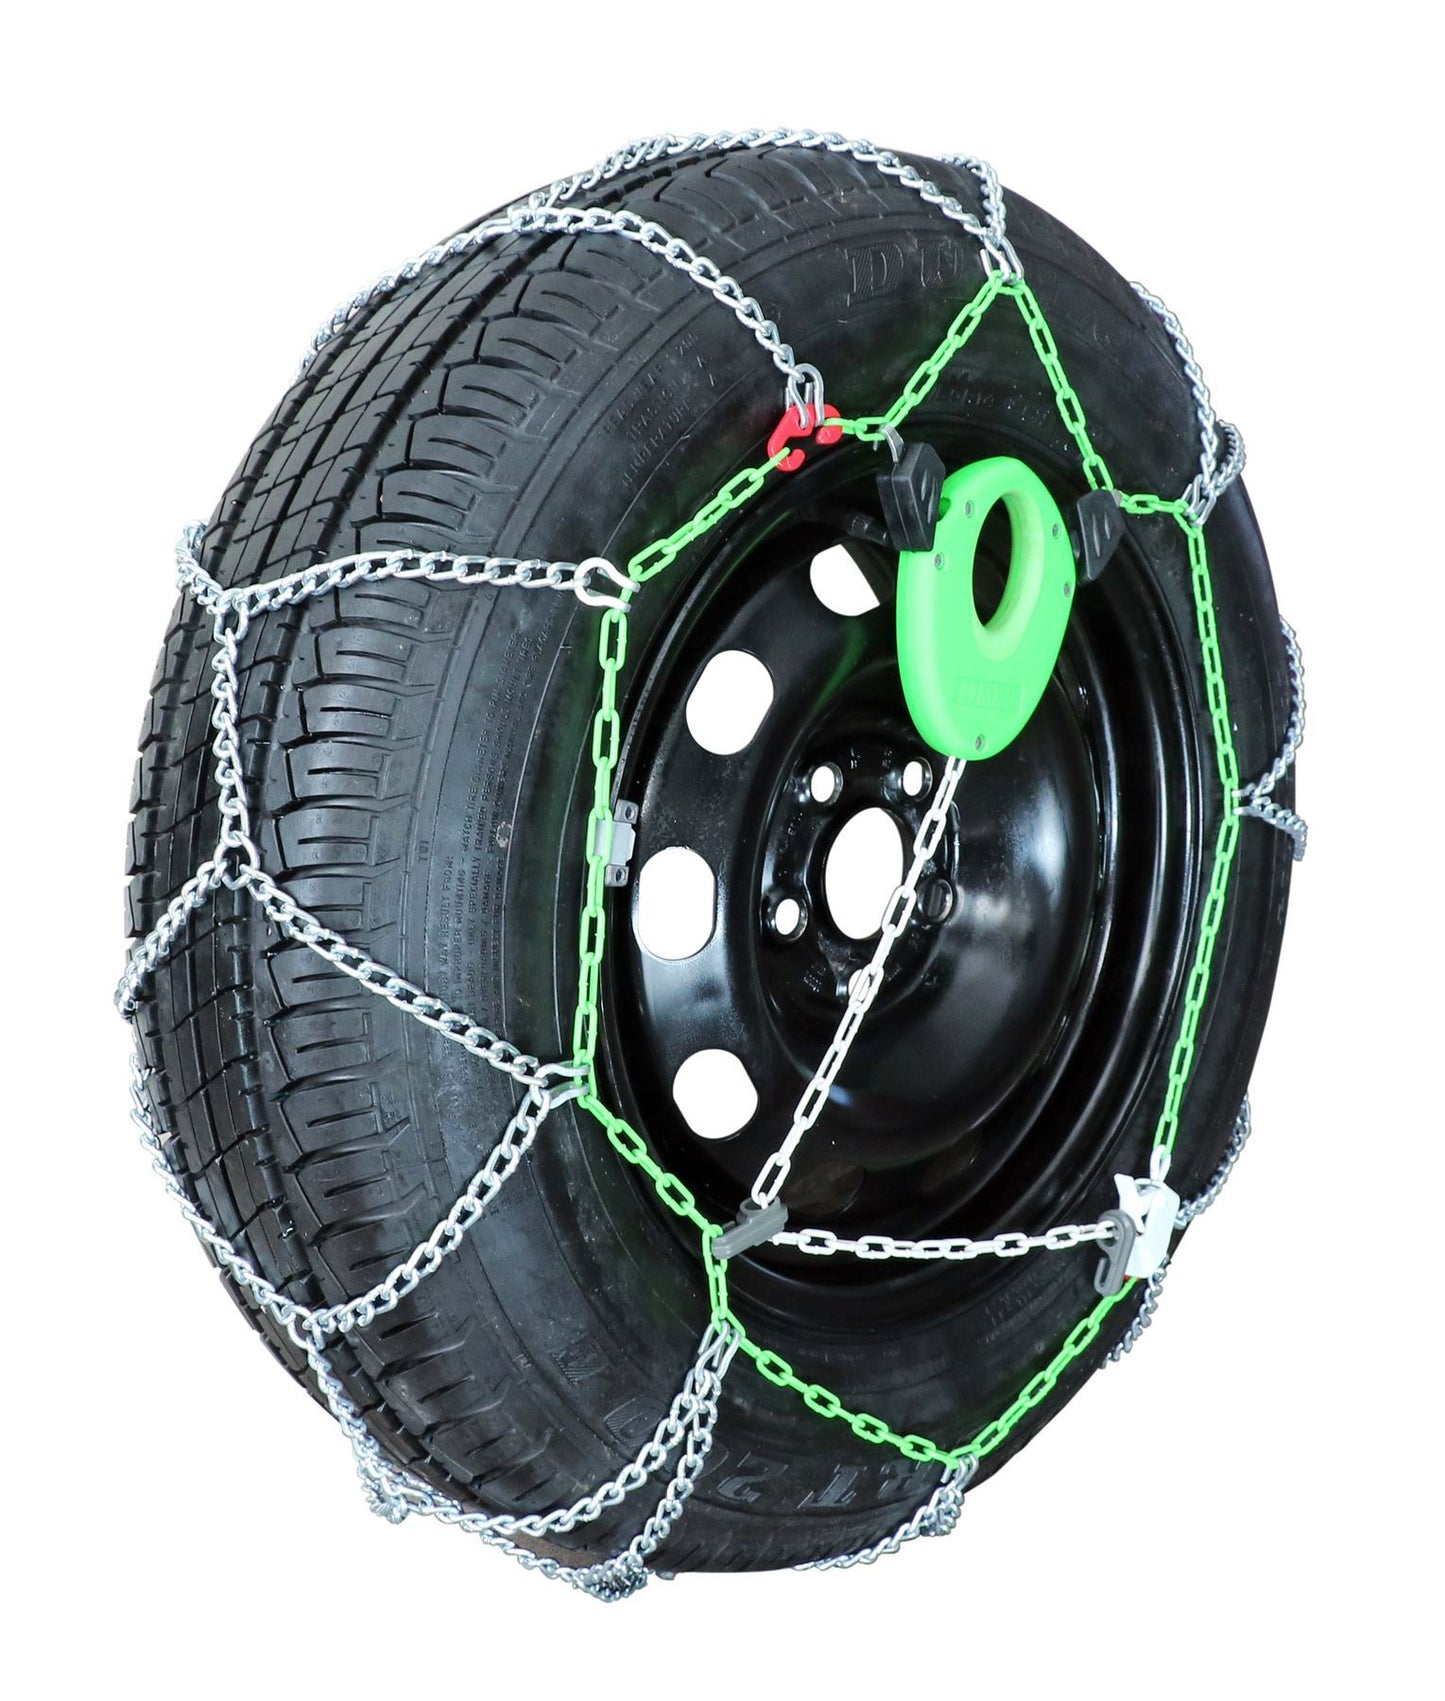 Green Valley TXR7 Winter 7mm Snow Chains - Car Tyre for 19" Wheels 275/30-19